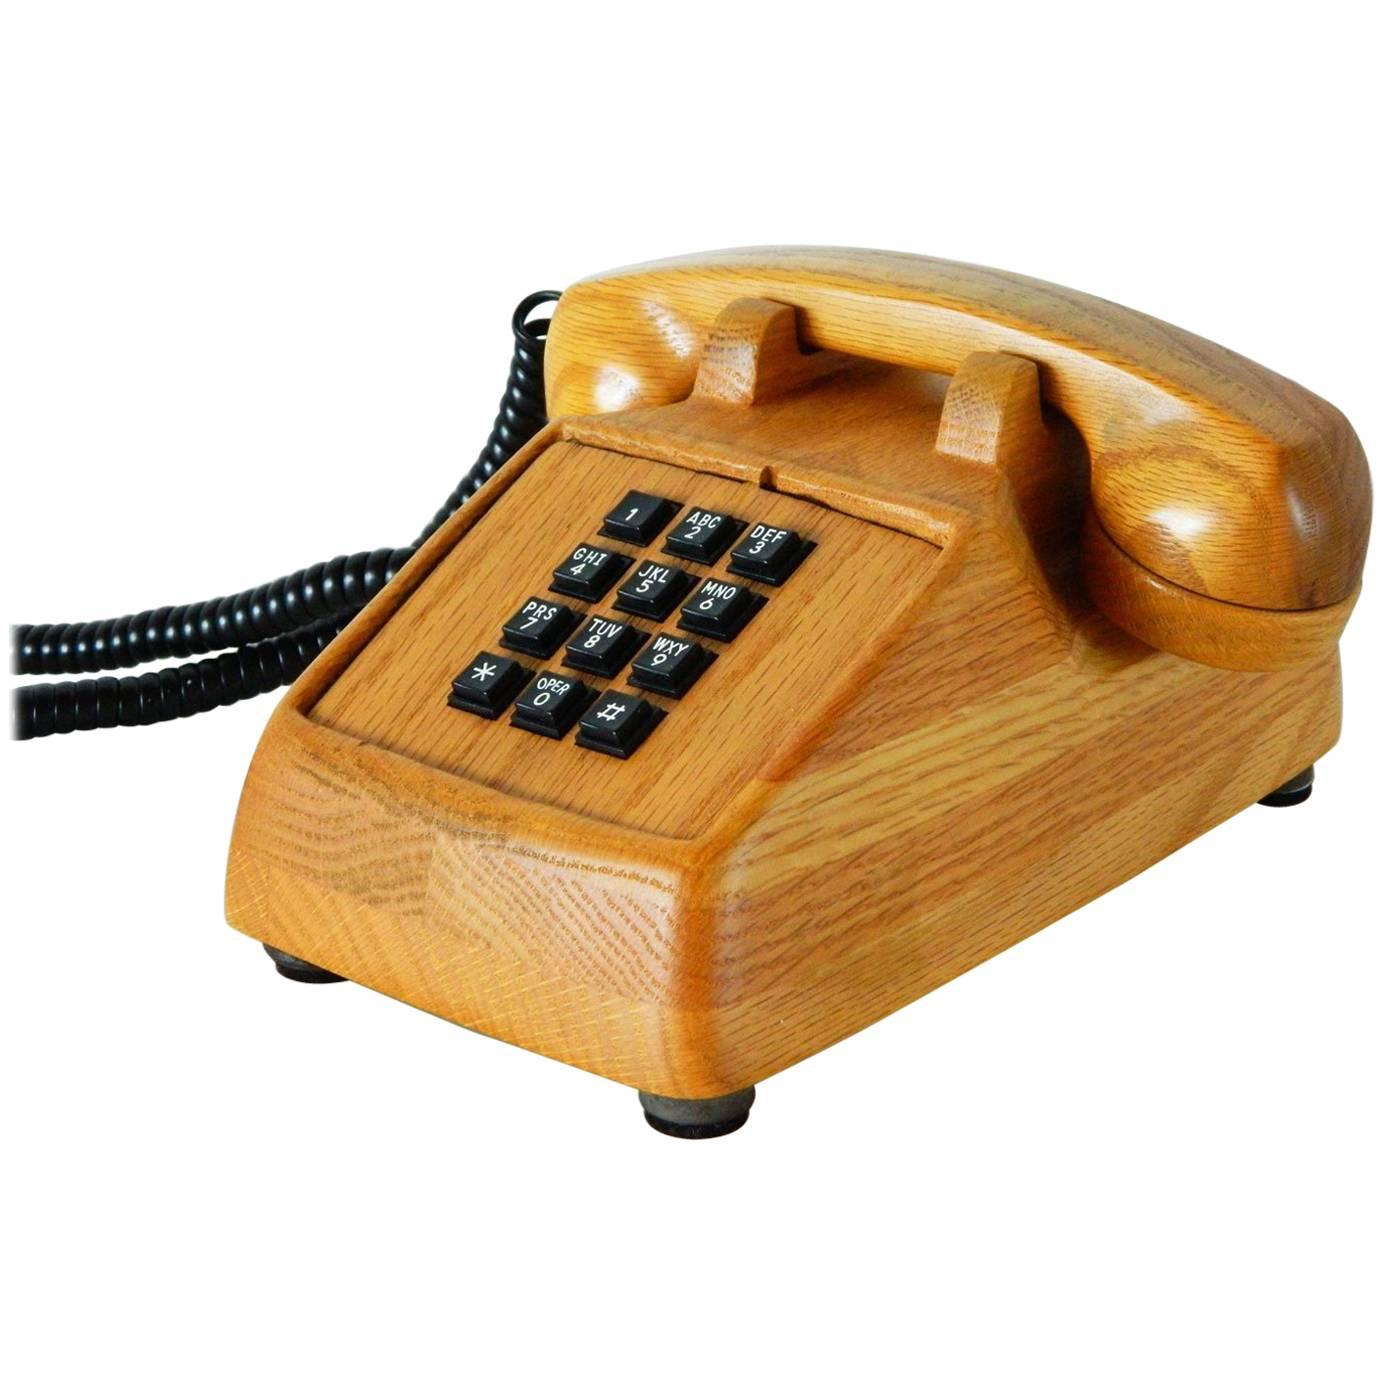 Vintage Telephone For Sale